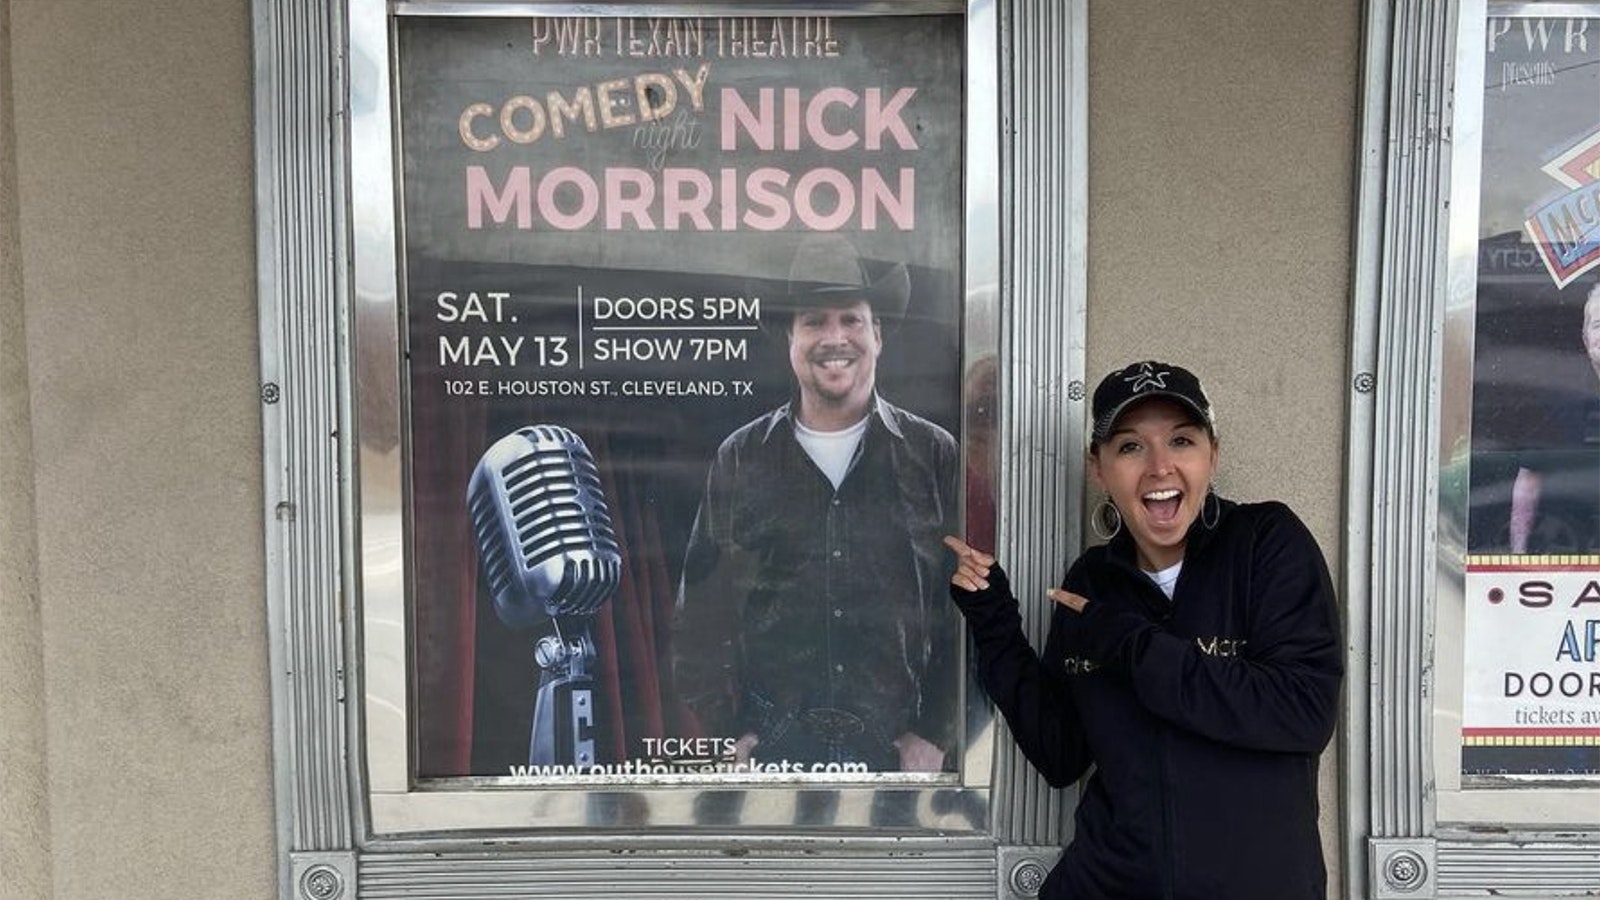 Nick Morrison's wife Ivy is excited to see her husband's billboard.